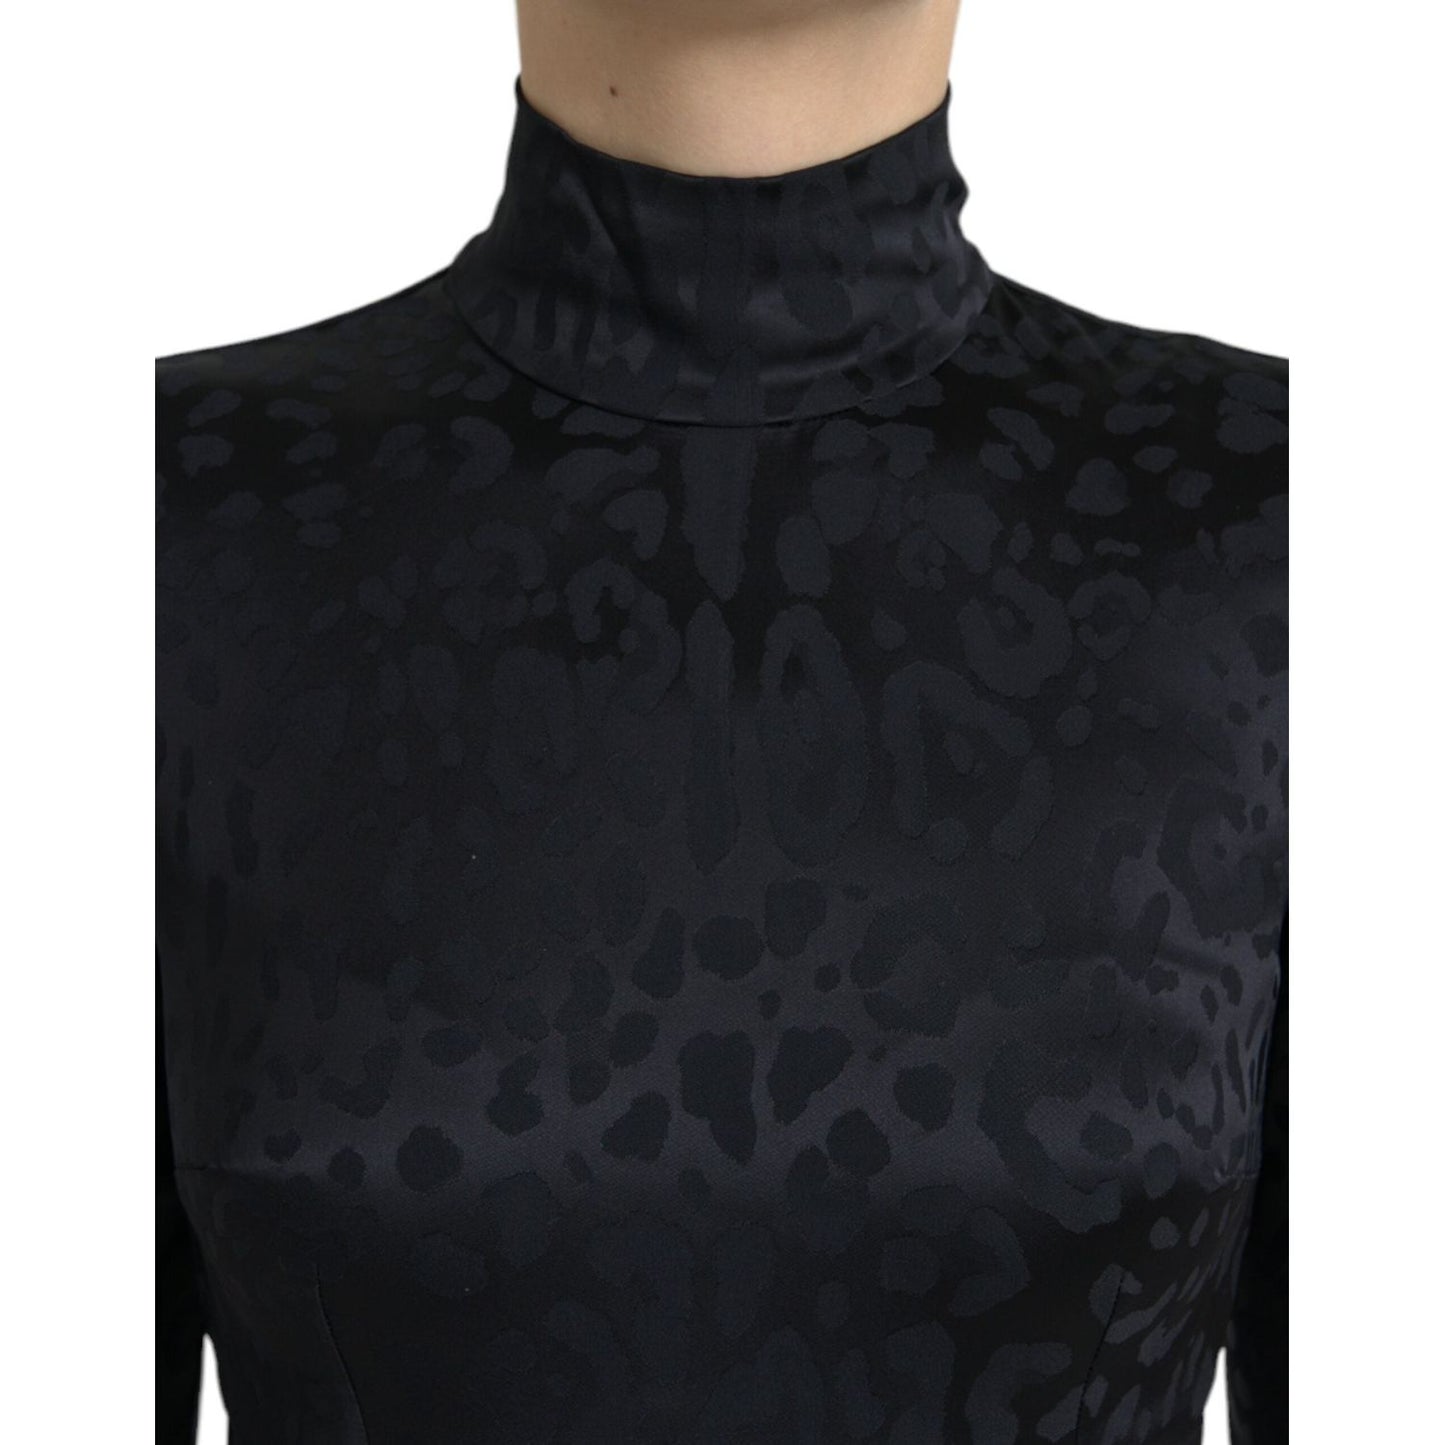 Dolce & Gabbana Elegant Black Cropped Top with Zip Closure elegant-black-cropped-top-with-zip-closure